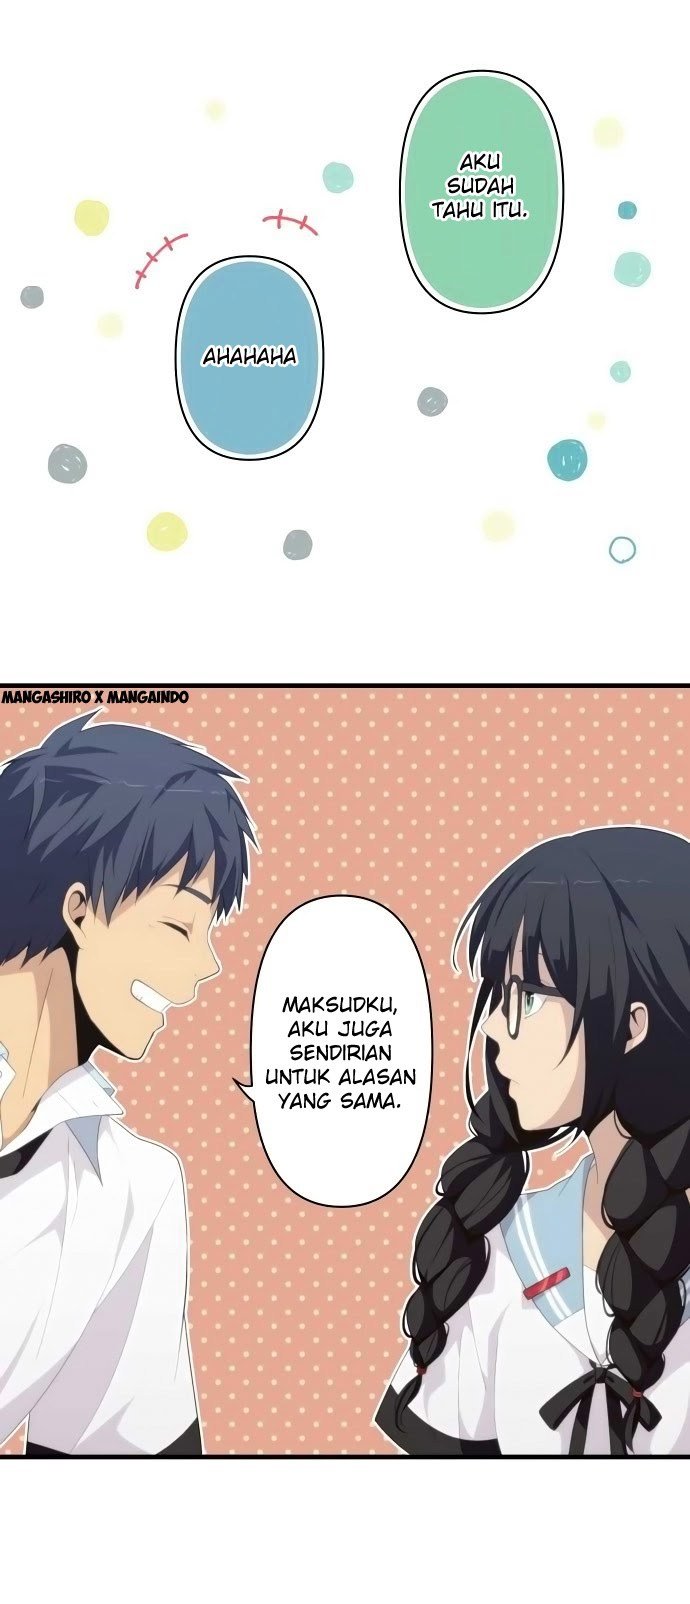 ReLife Chapter 148